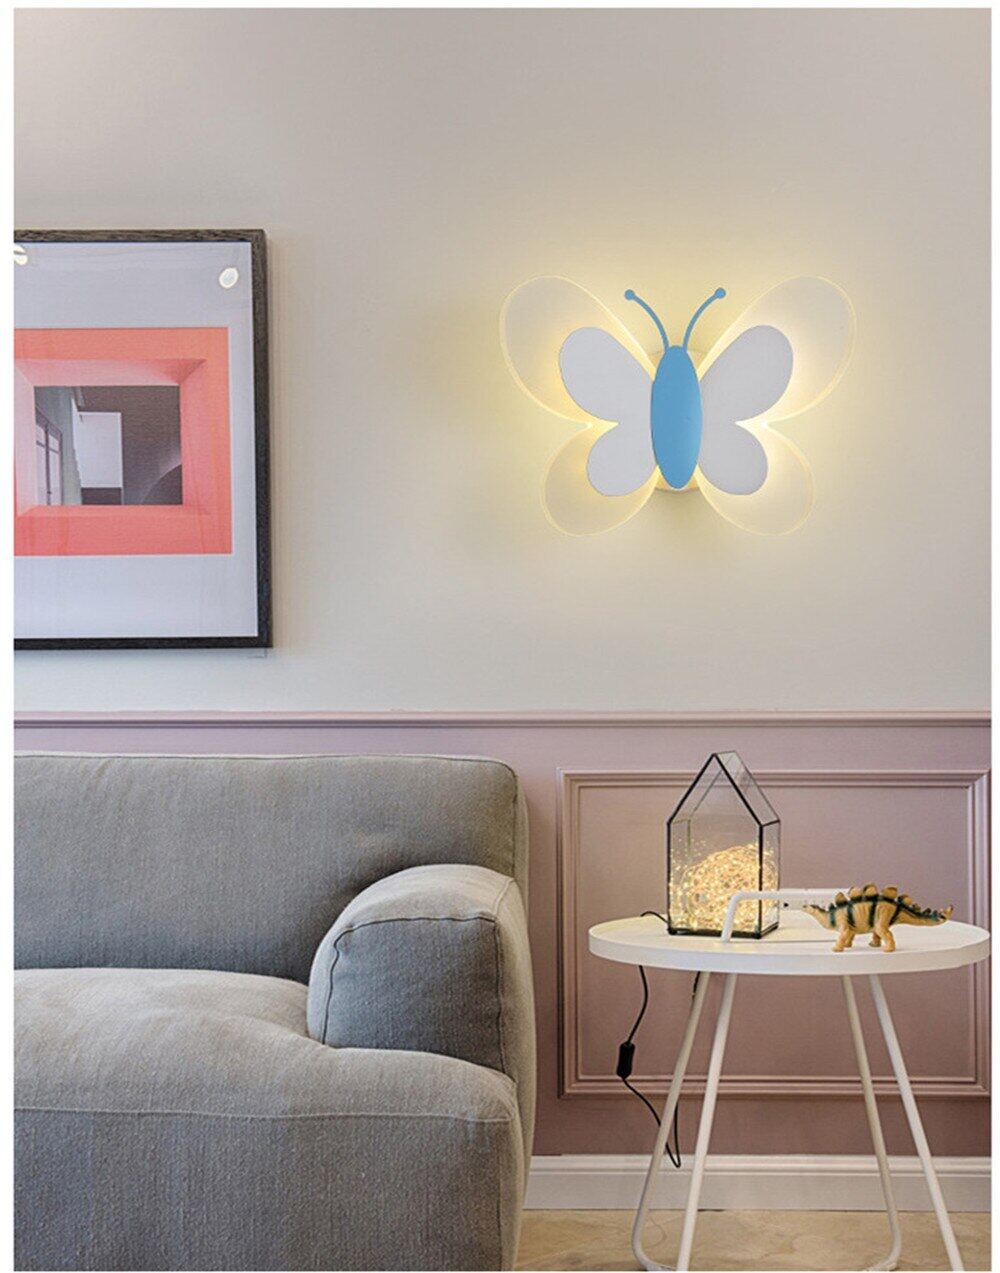 Butterfly Bedside Wall Lamp for cozy bedroom lighting11